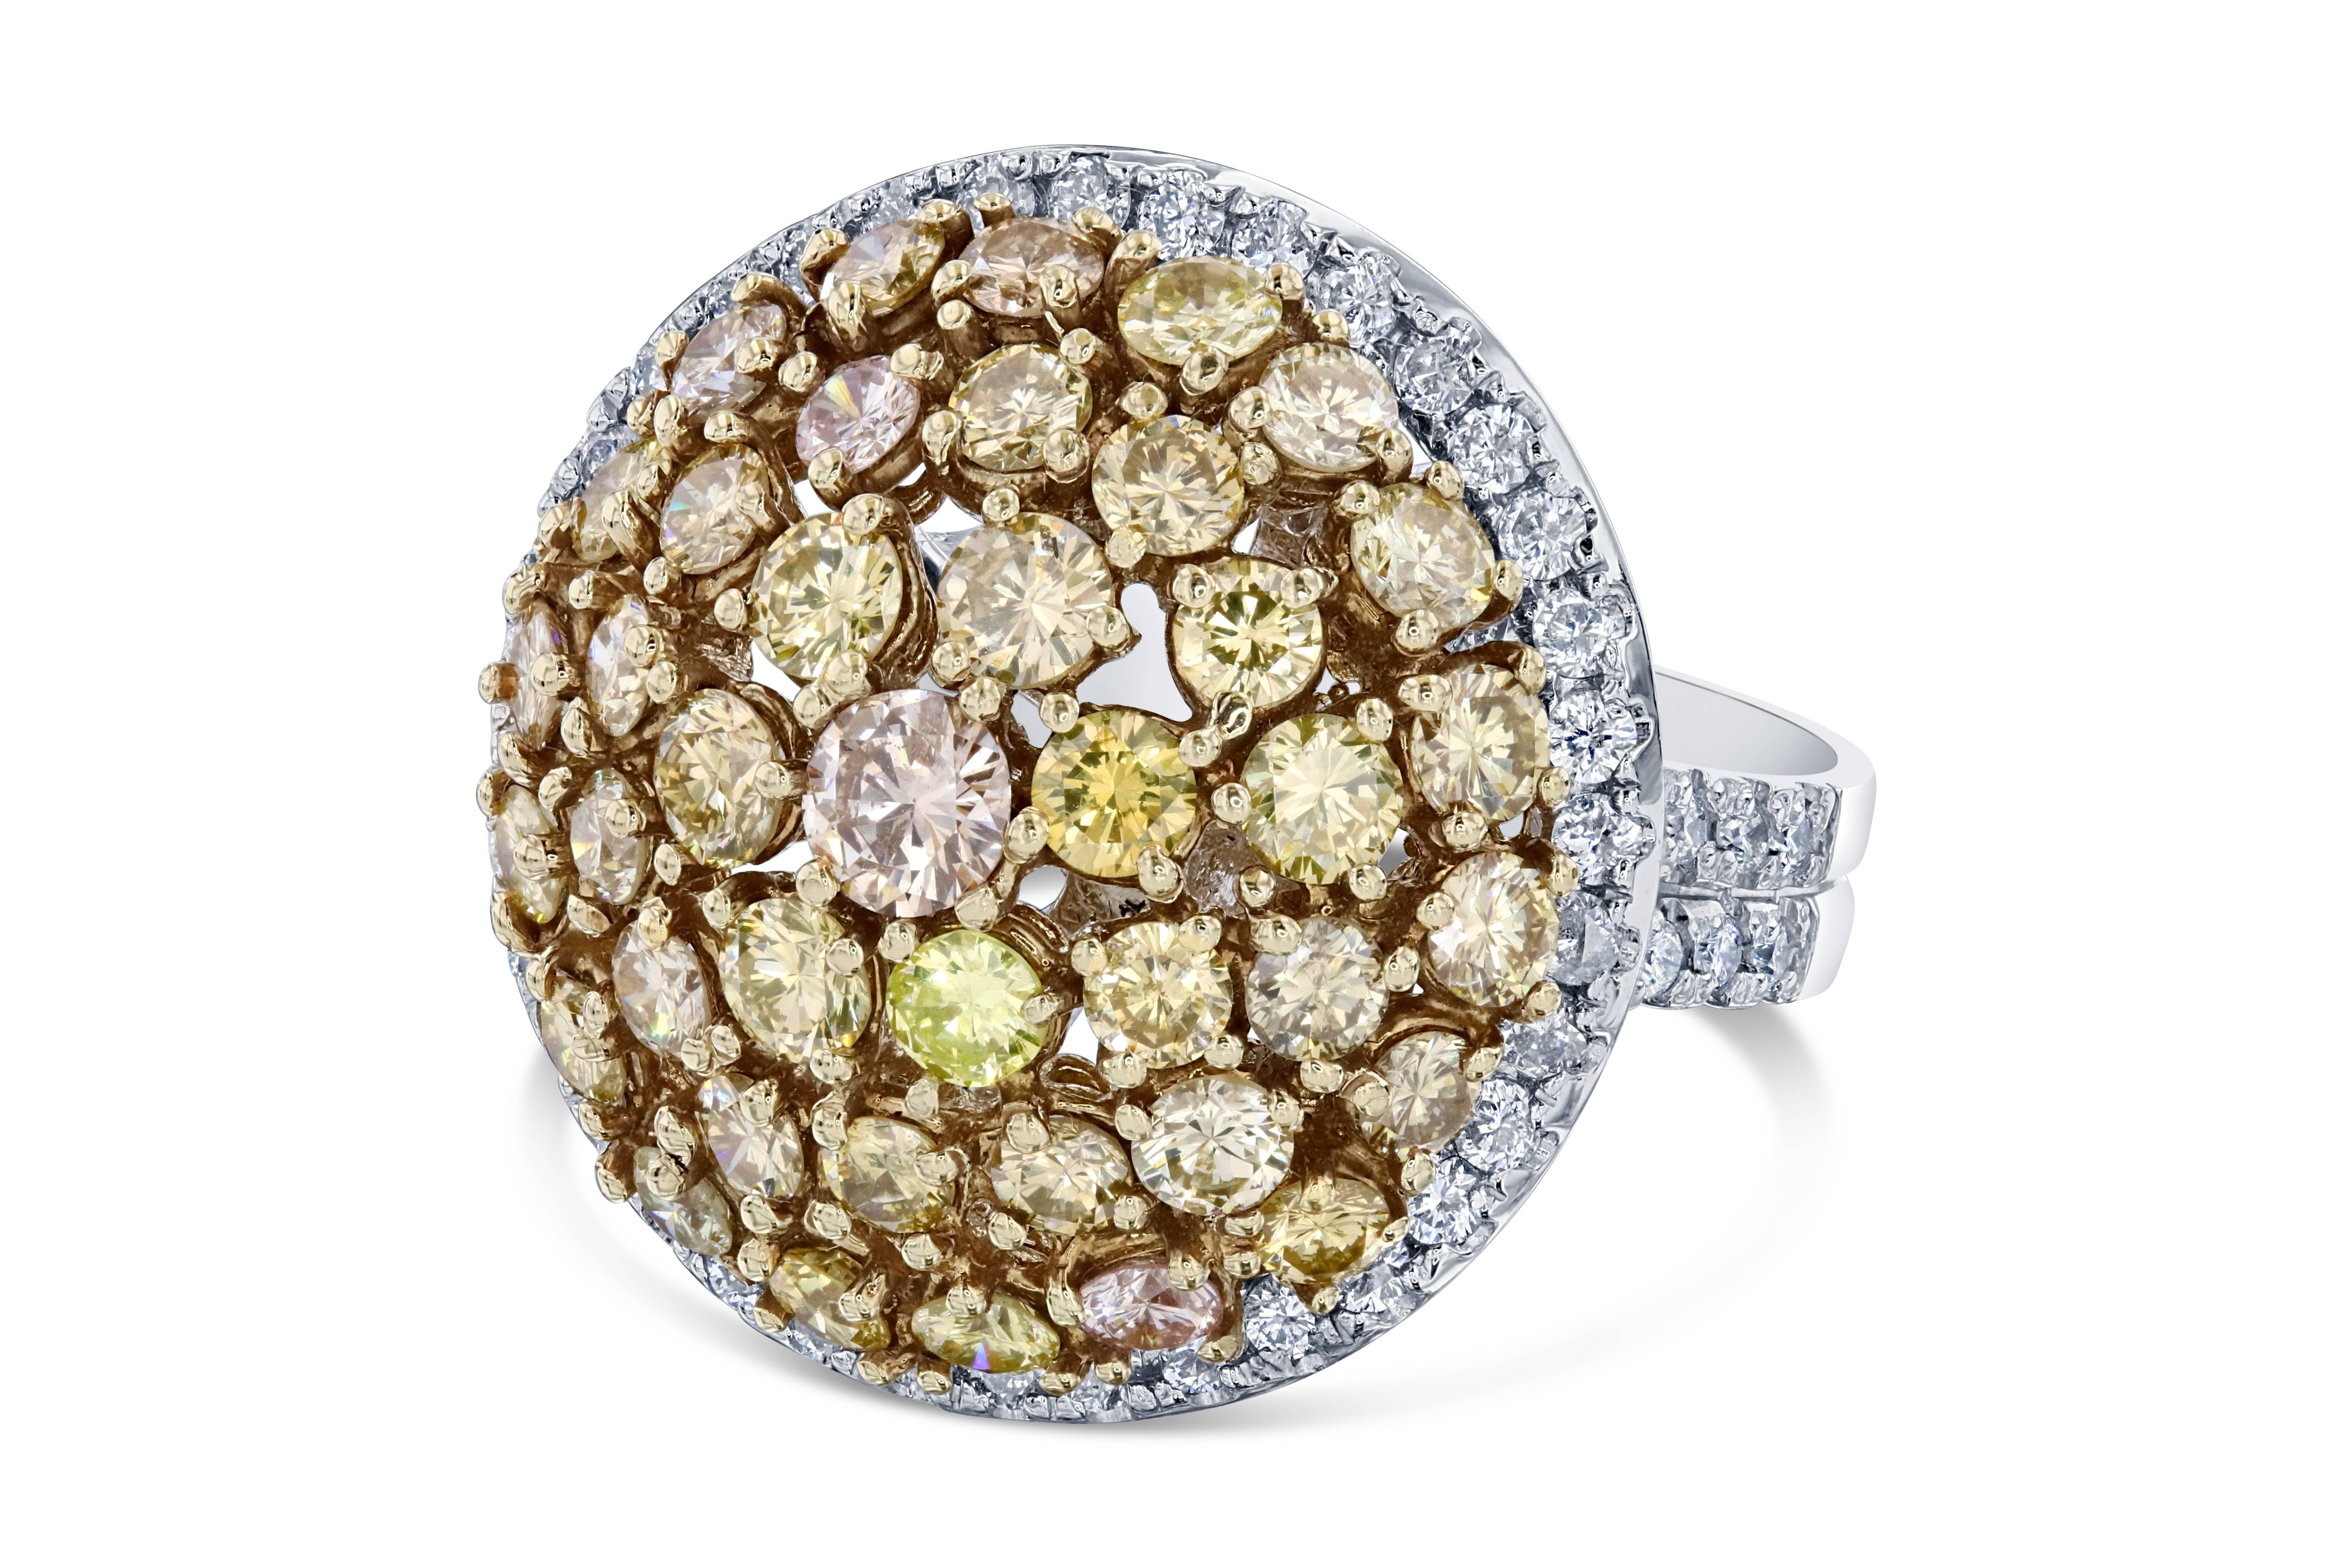 Elegance and beauty at its best - a real show stopper!   There are 40 Round Cut Fancy Colored Diamonds that weigh 4.35 carats clustered around the center of the ring.  These diamonds are natural in color and the clarity is a SI2.  There are also 64